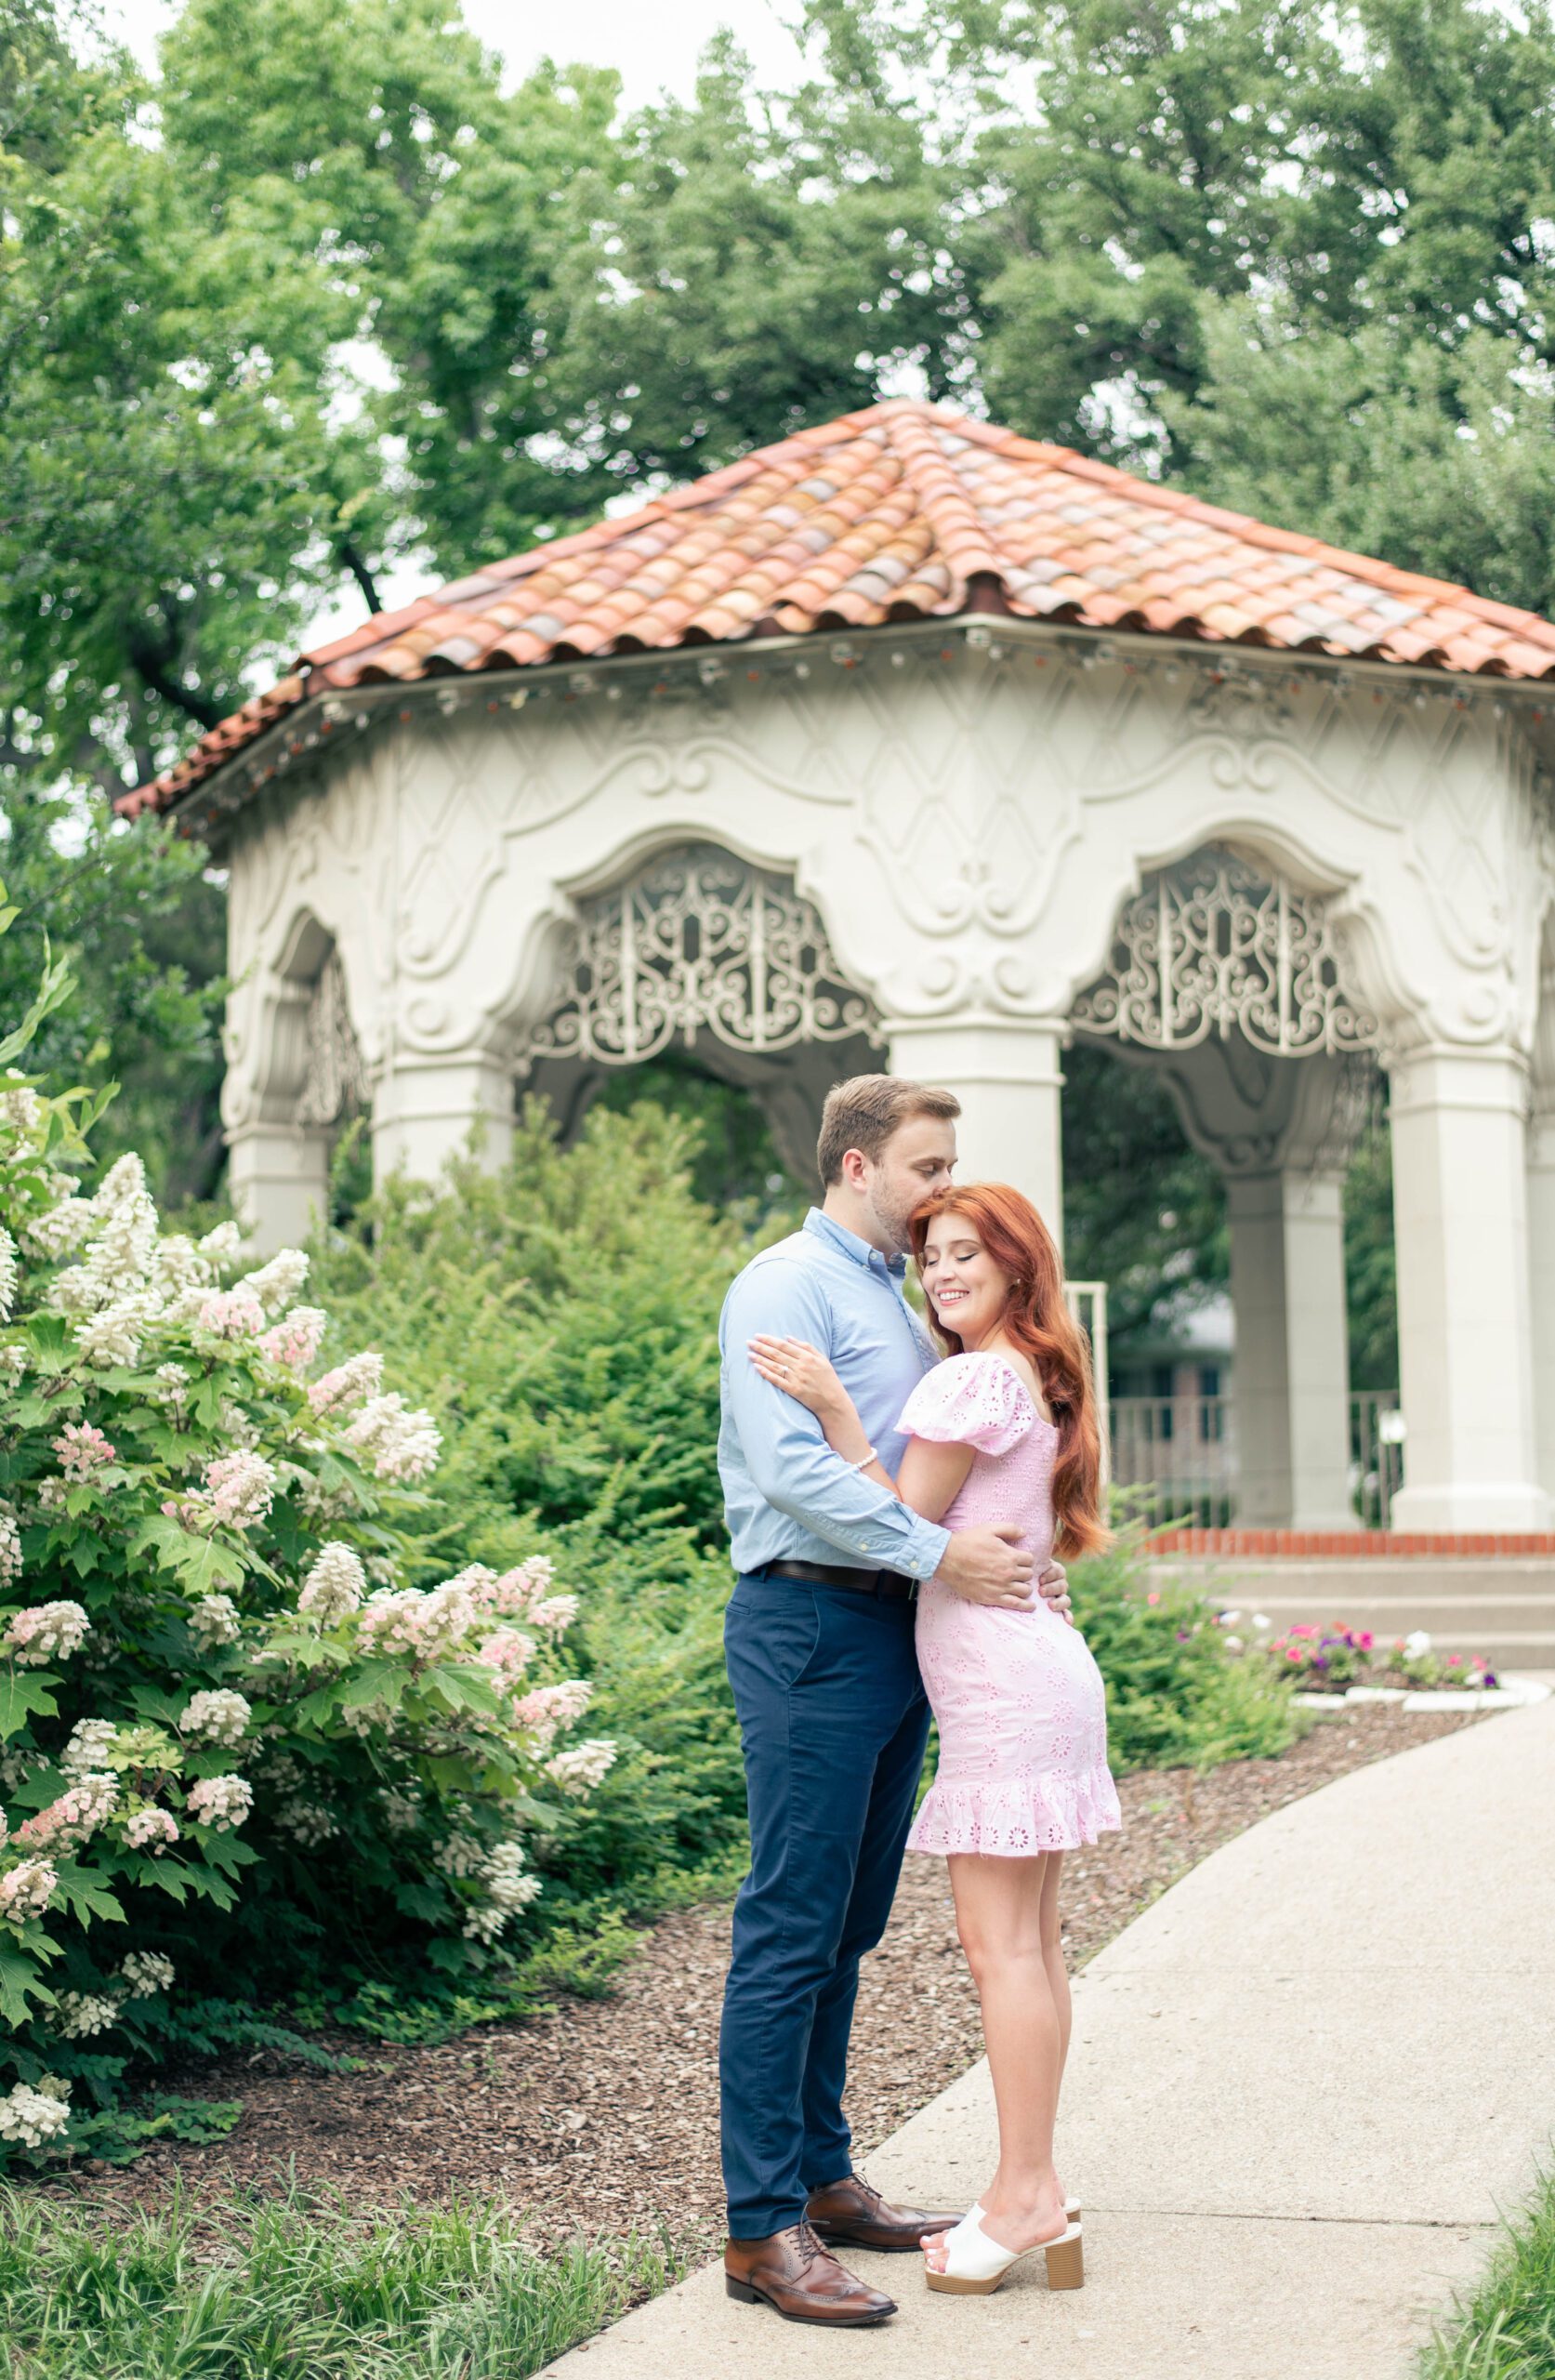 man kisses woman on top of her head while she smiles brightly. Surrounded by lovely flowers and an elegant gazebo at Flippen Park located in Dallas, TX.